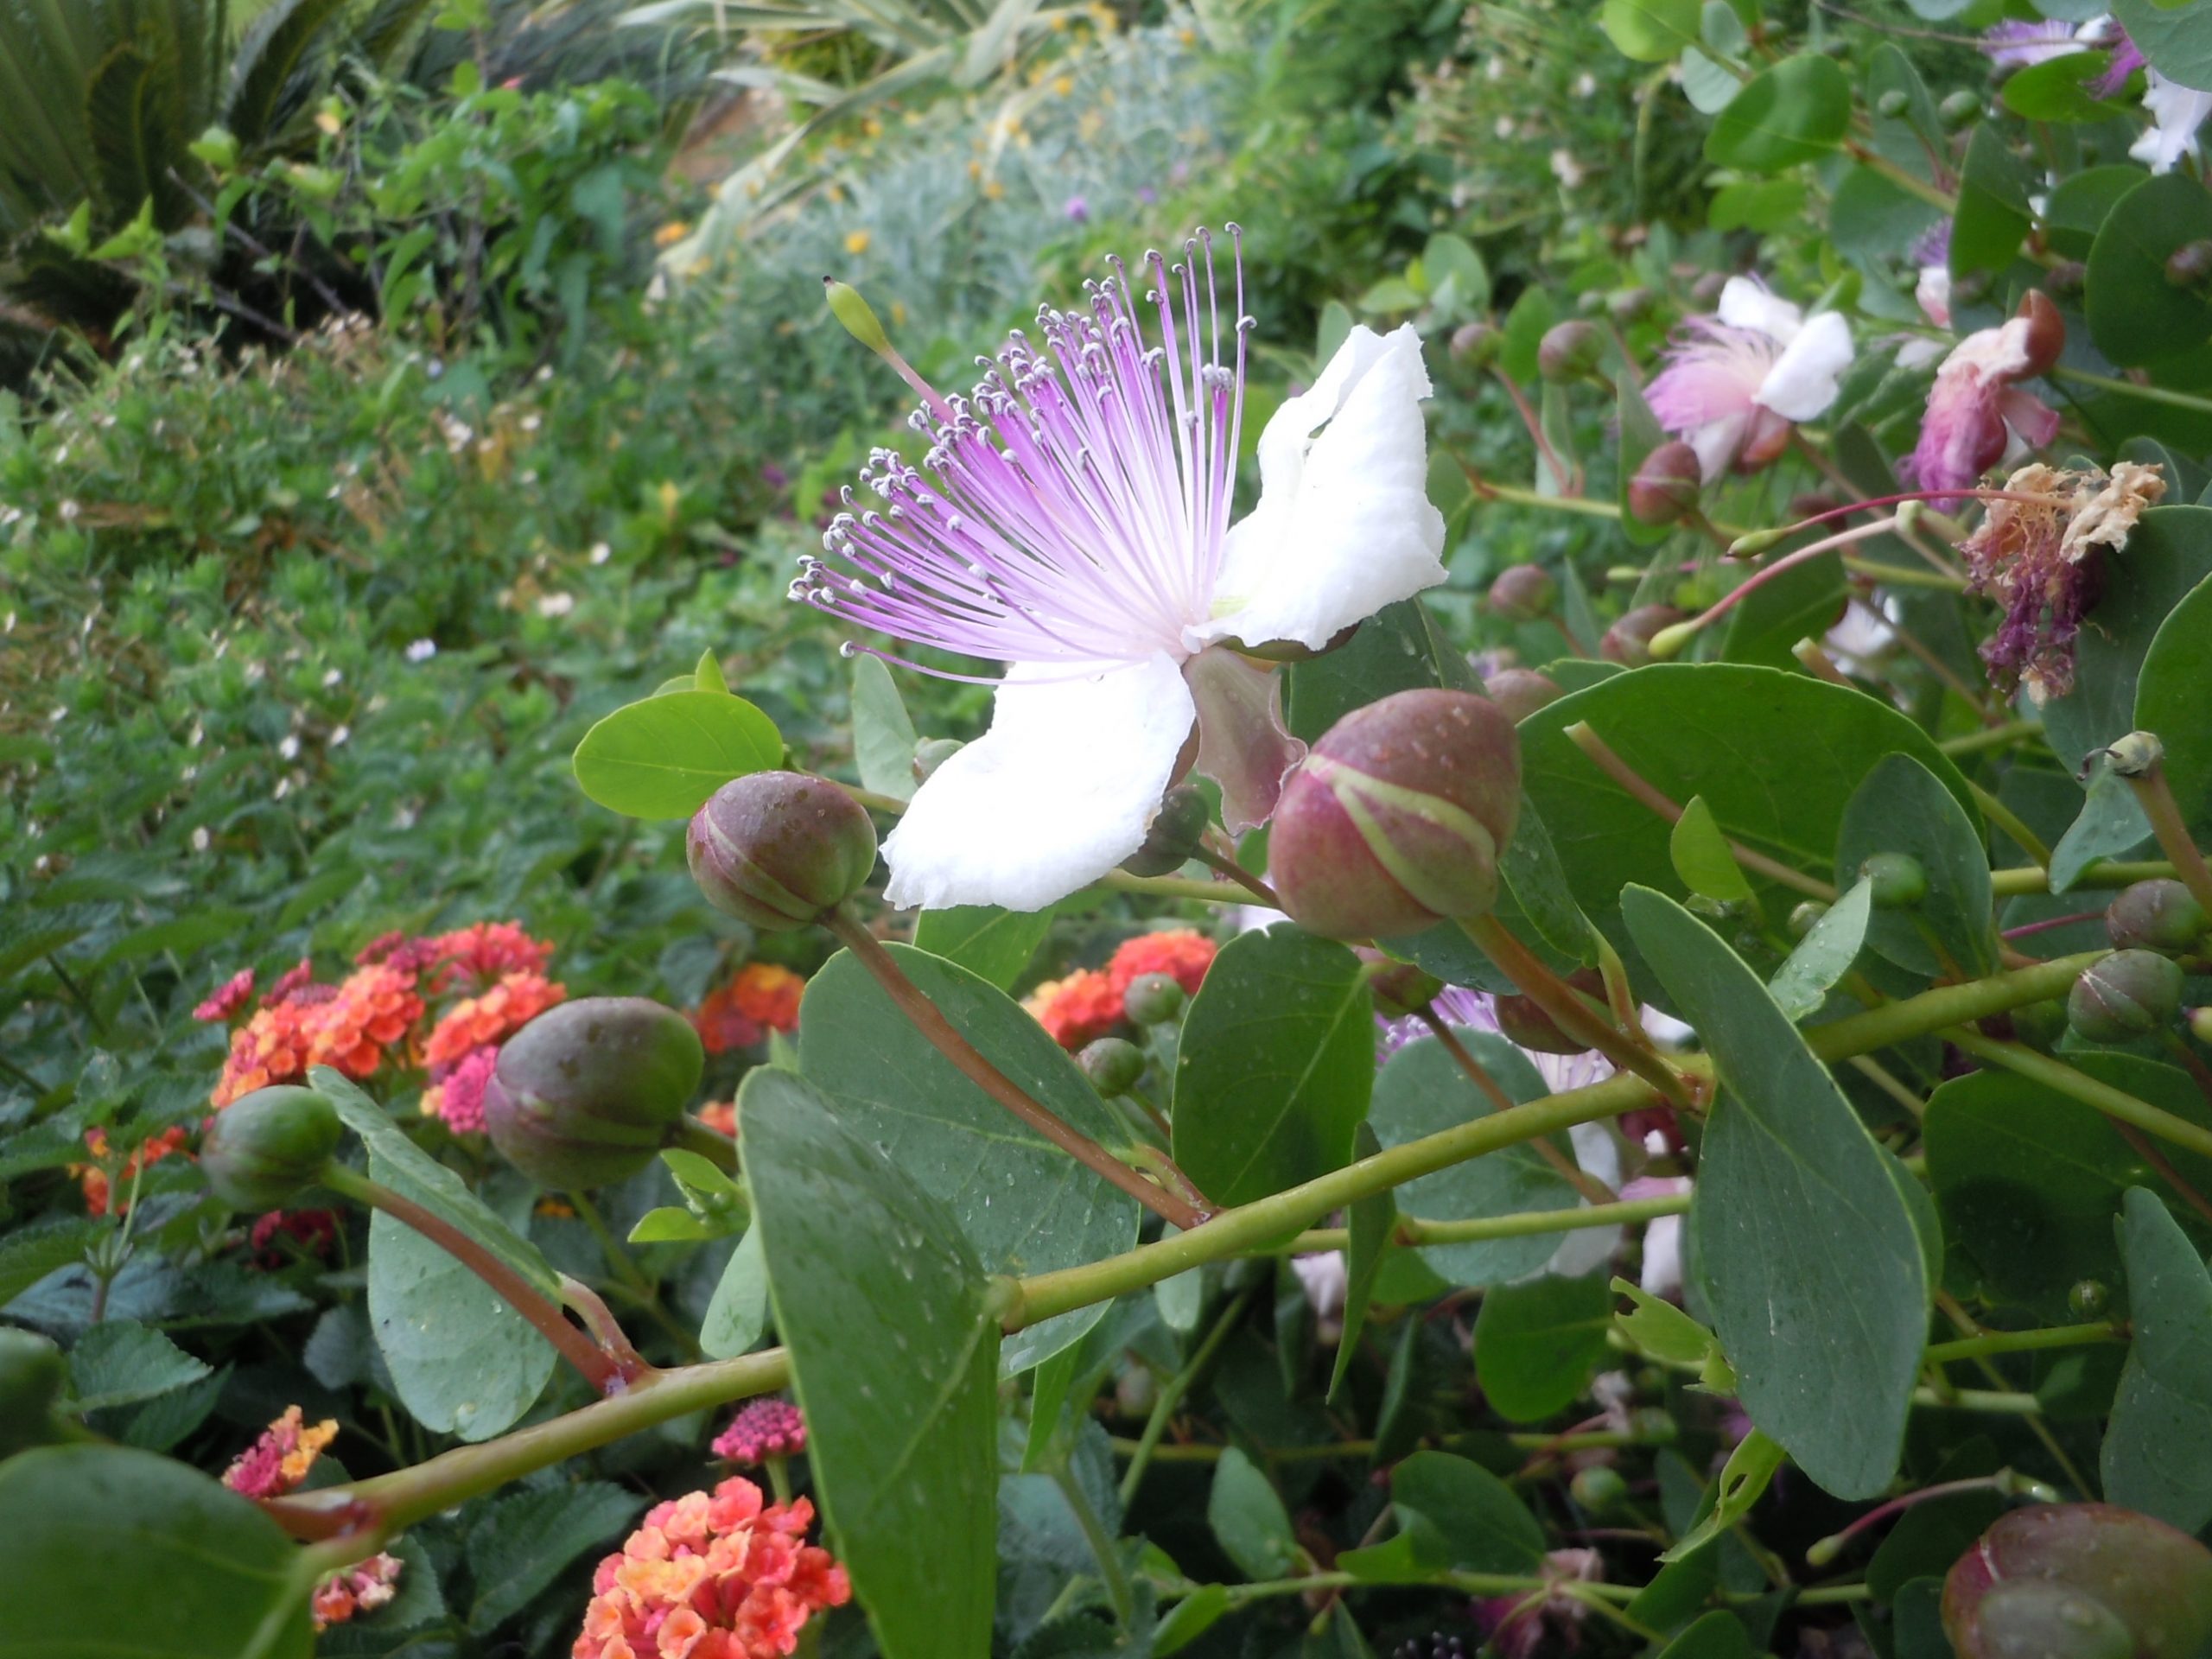 a caper flower. The flower buds are pickled to make the capers used in cooking